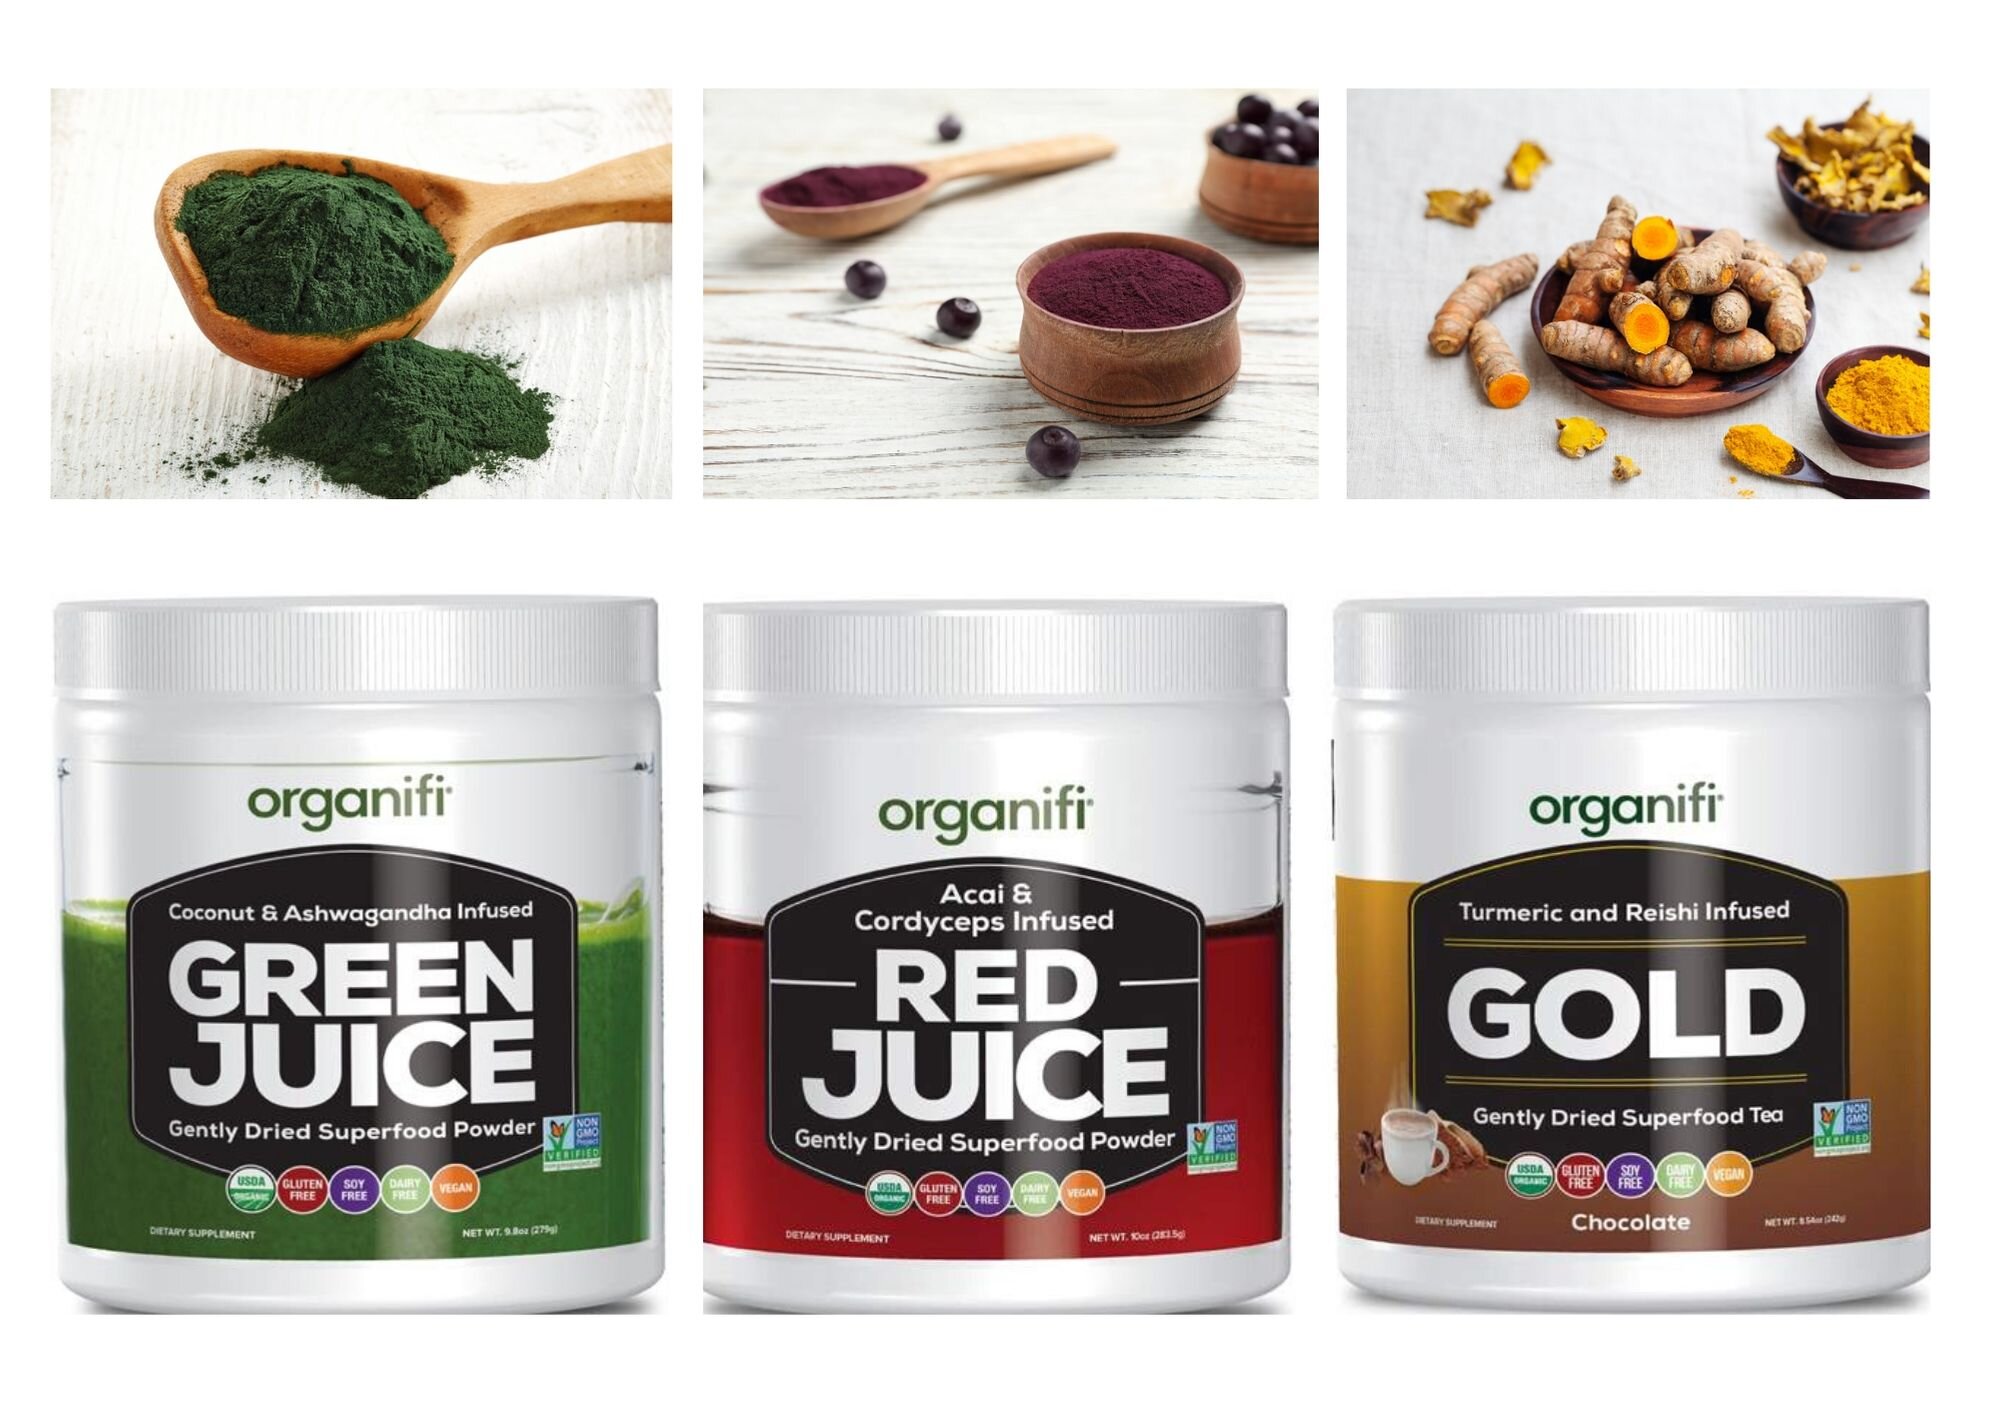 Not known Incorrect Statements About Organifi Green Juice (Label) - Nih Office Of Dietary Supplements 